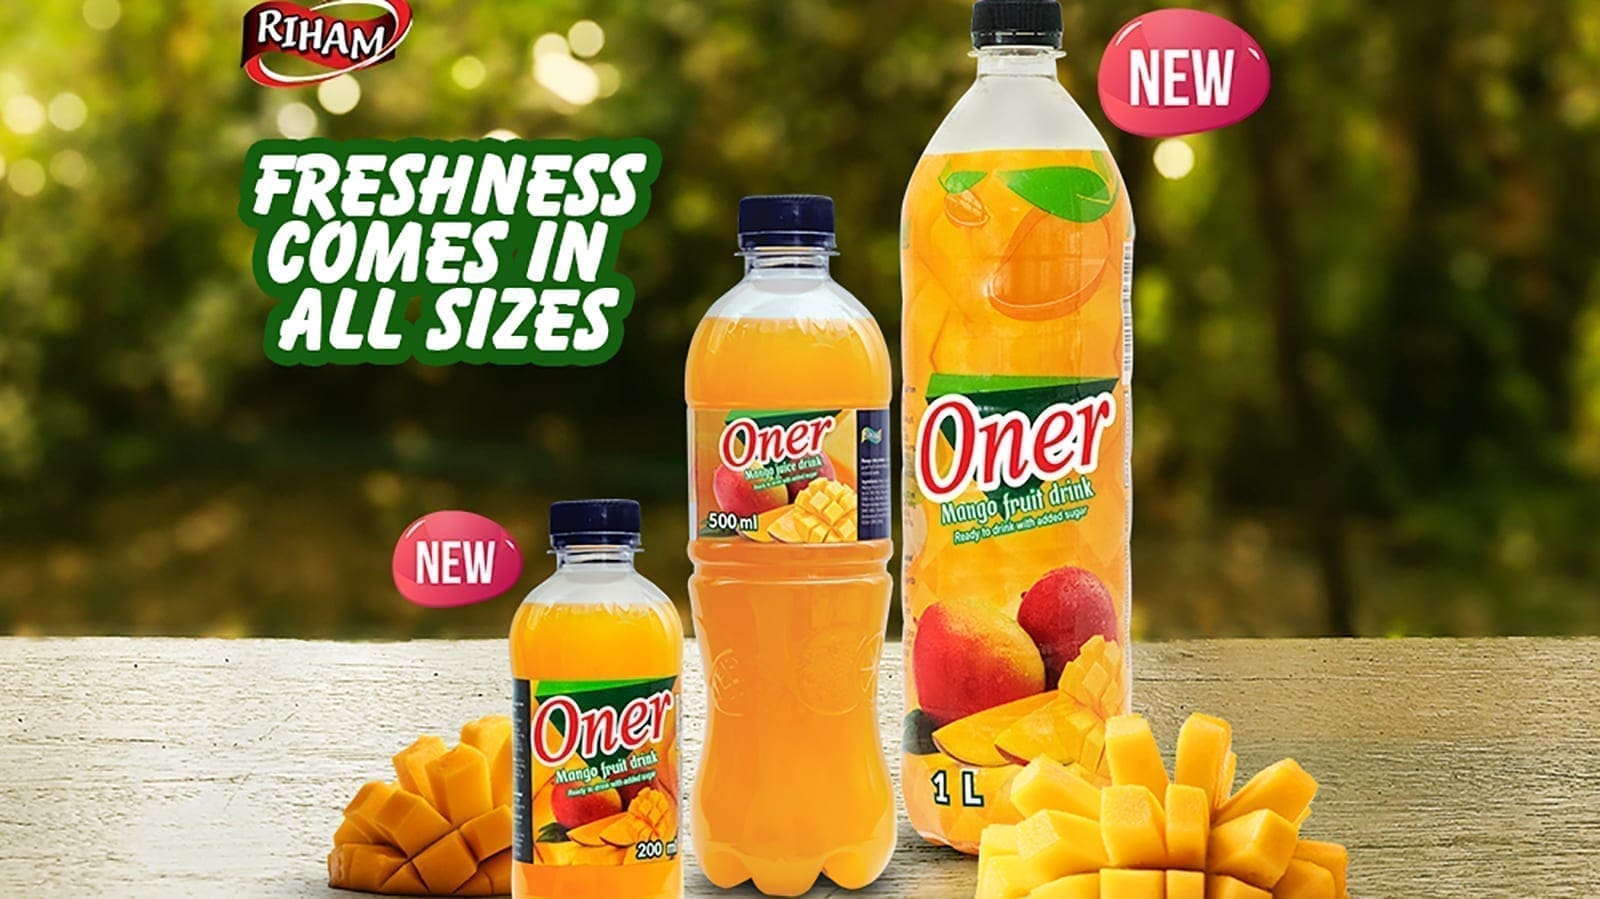 Uganda beverage maker Hariss International expands Oner Fruit Juice offering with launch of new pack sizes